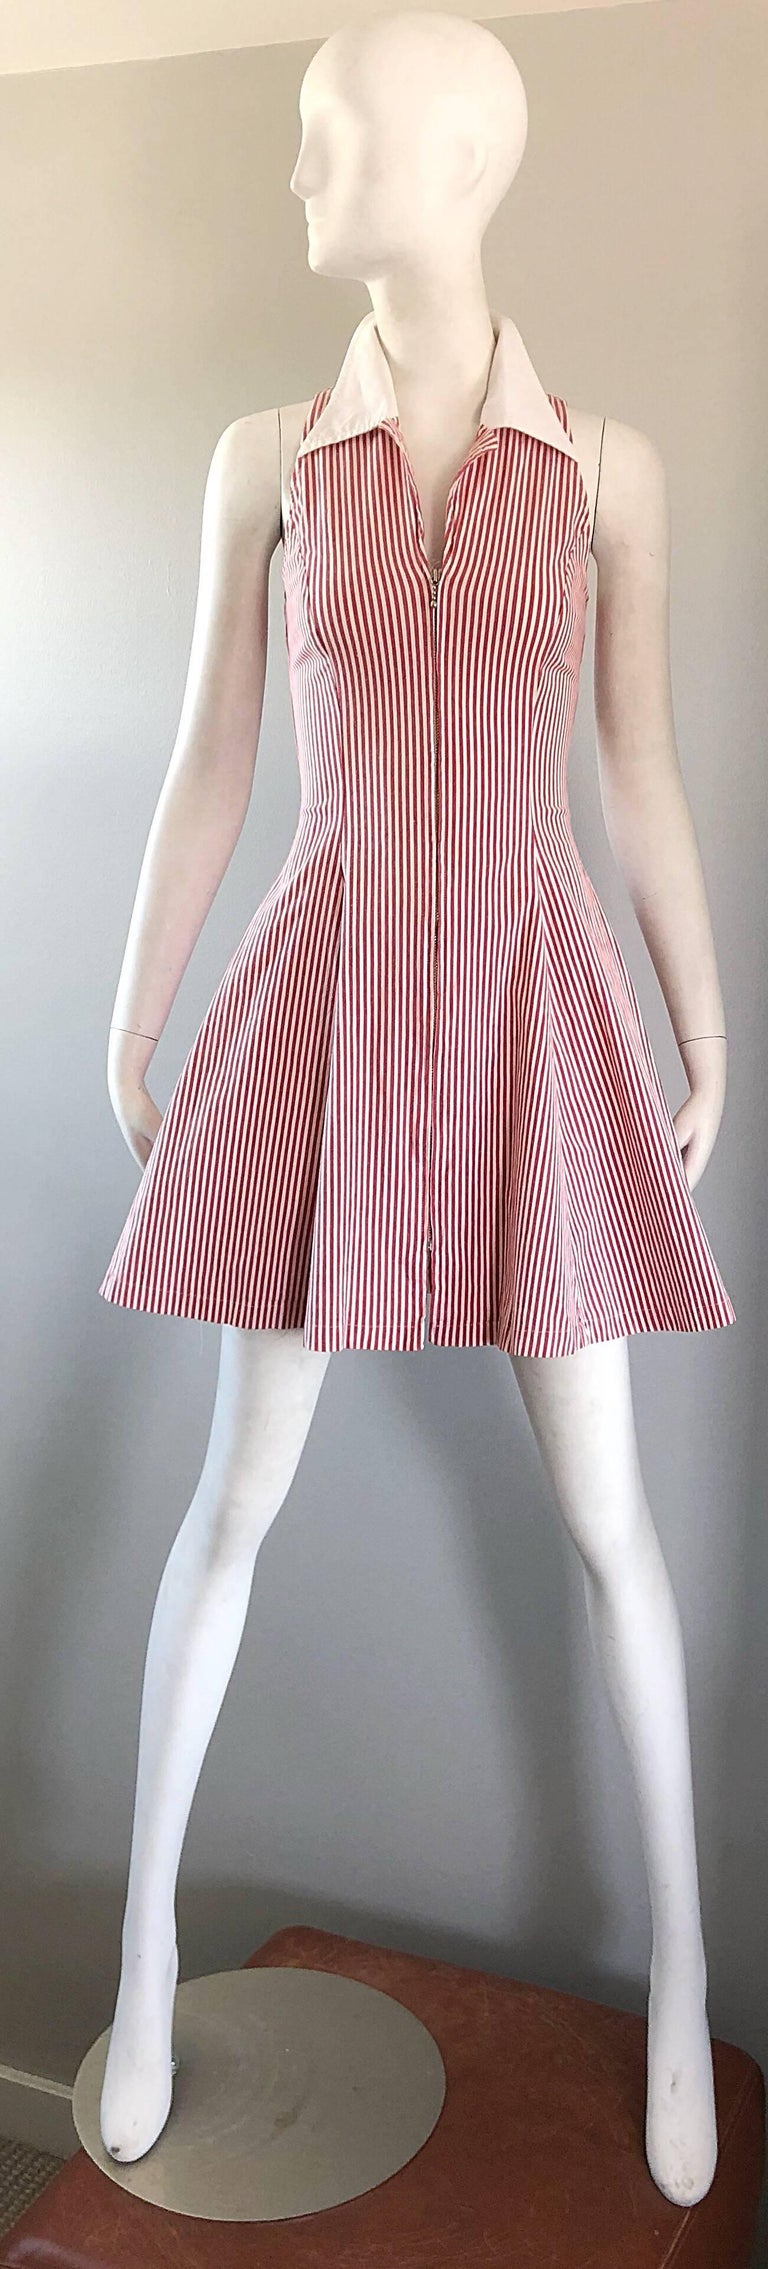 1980s Angelo Tarlazzi Vintage Red and White Seersucker Nautical Striped Dress  For Sale 8